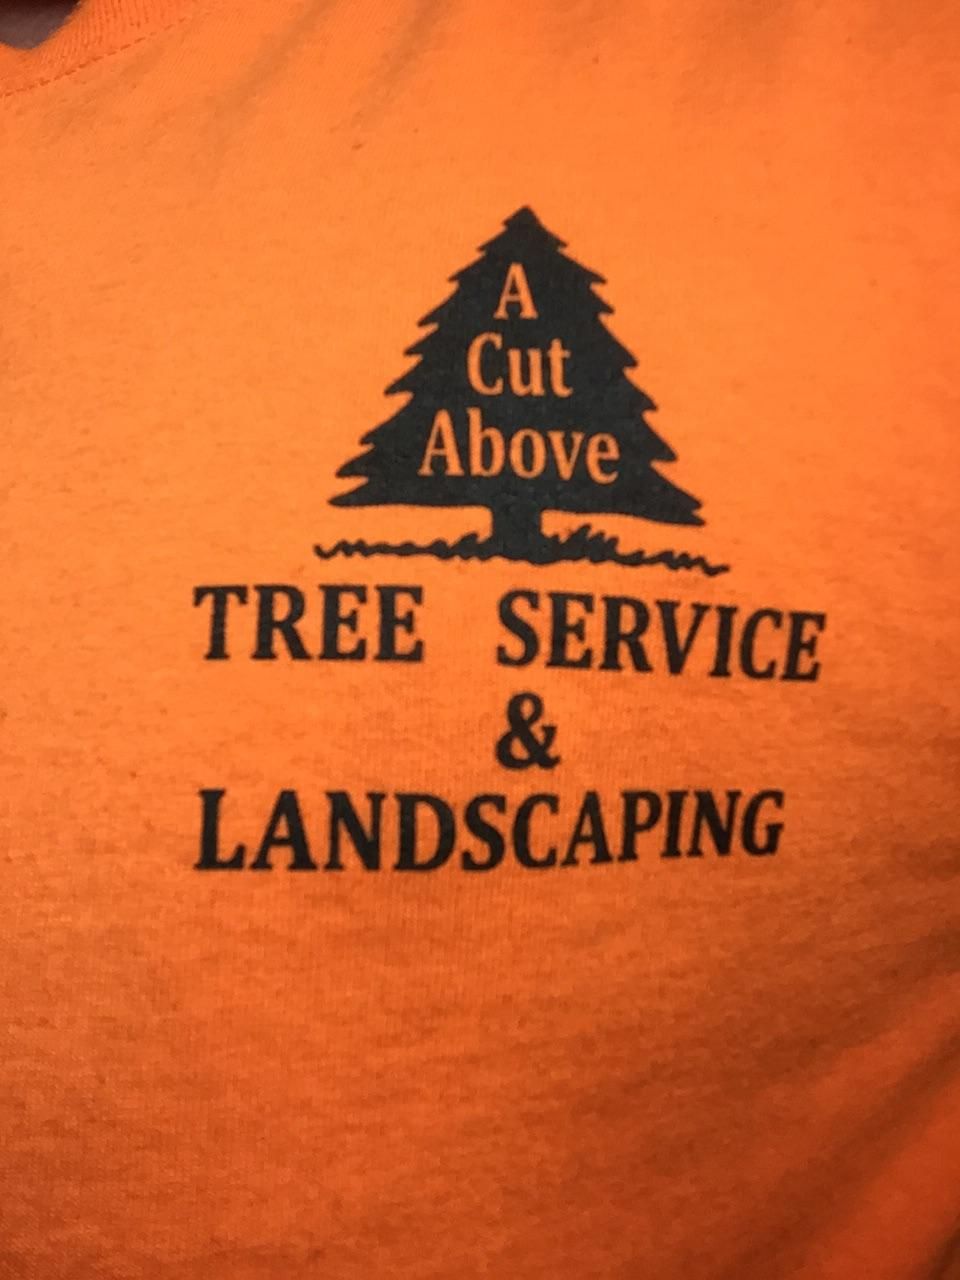 A Cut Above Tree Service & Landscaping